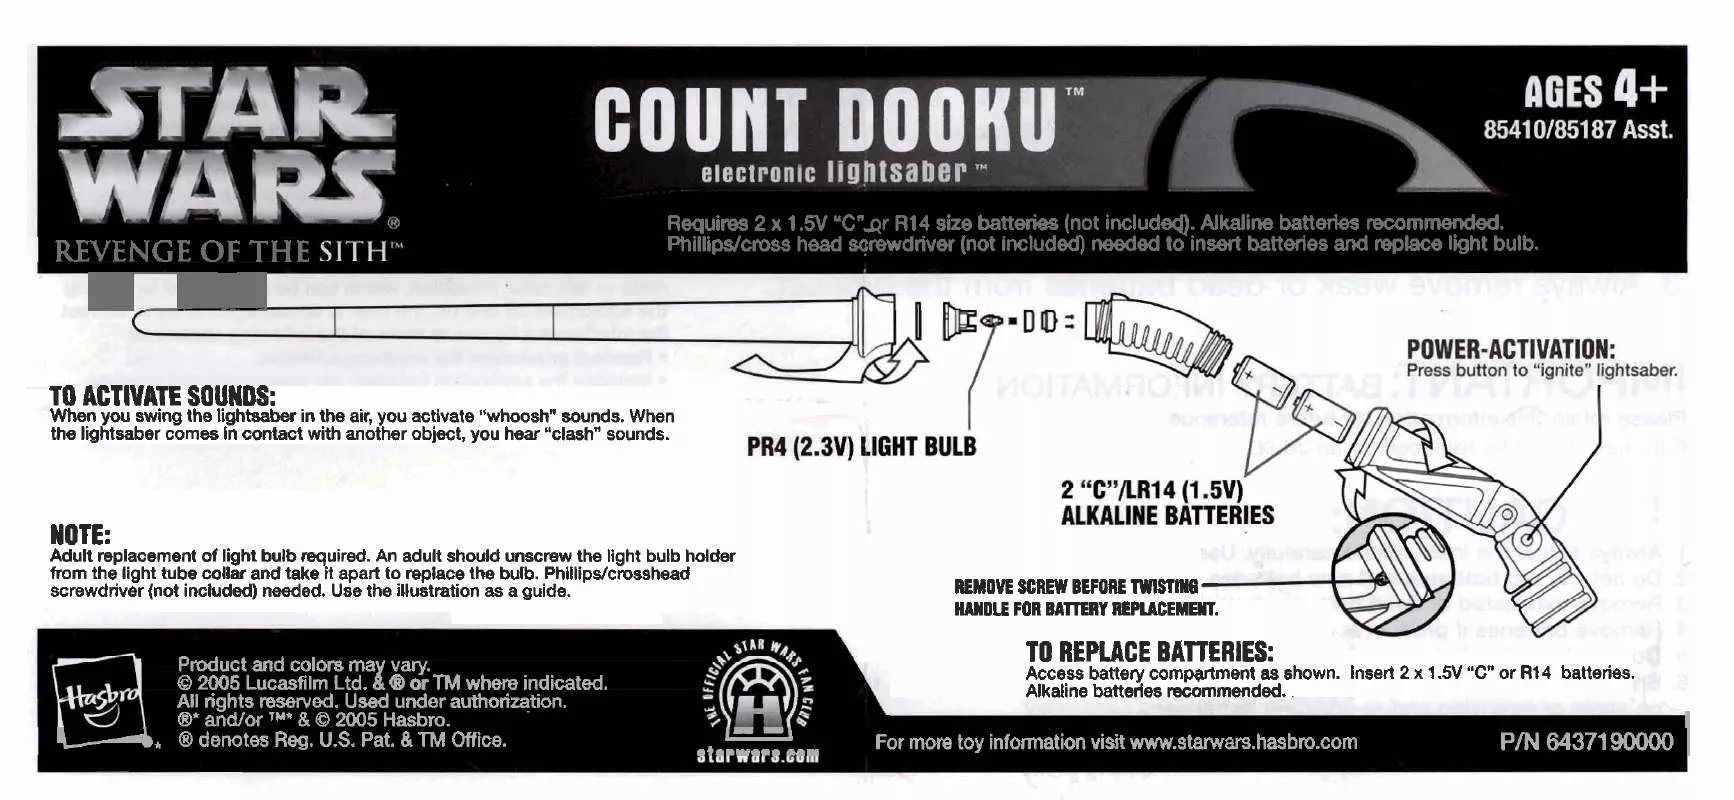 Mode d'emploi HASBRO STAR WARS REVENGE OF THE SITH COUNT DOOKU ELECTRONIC LIGHTSABER